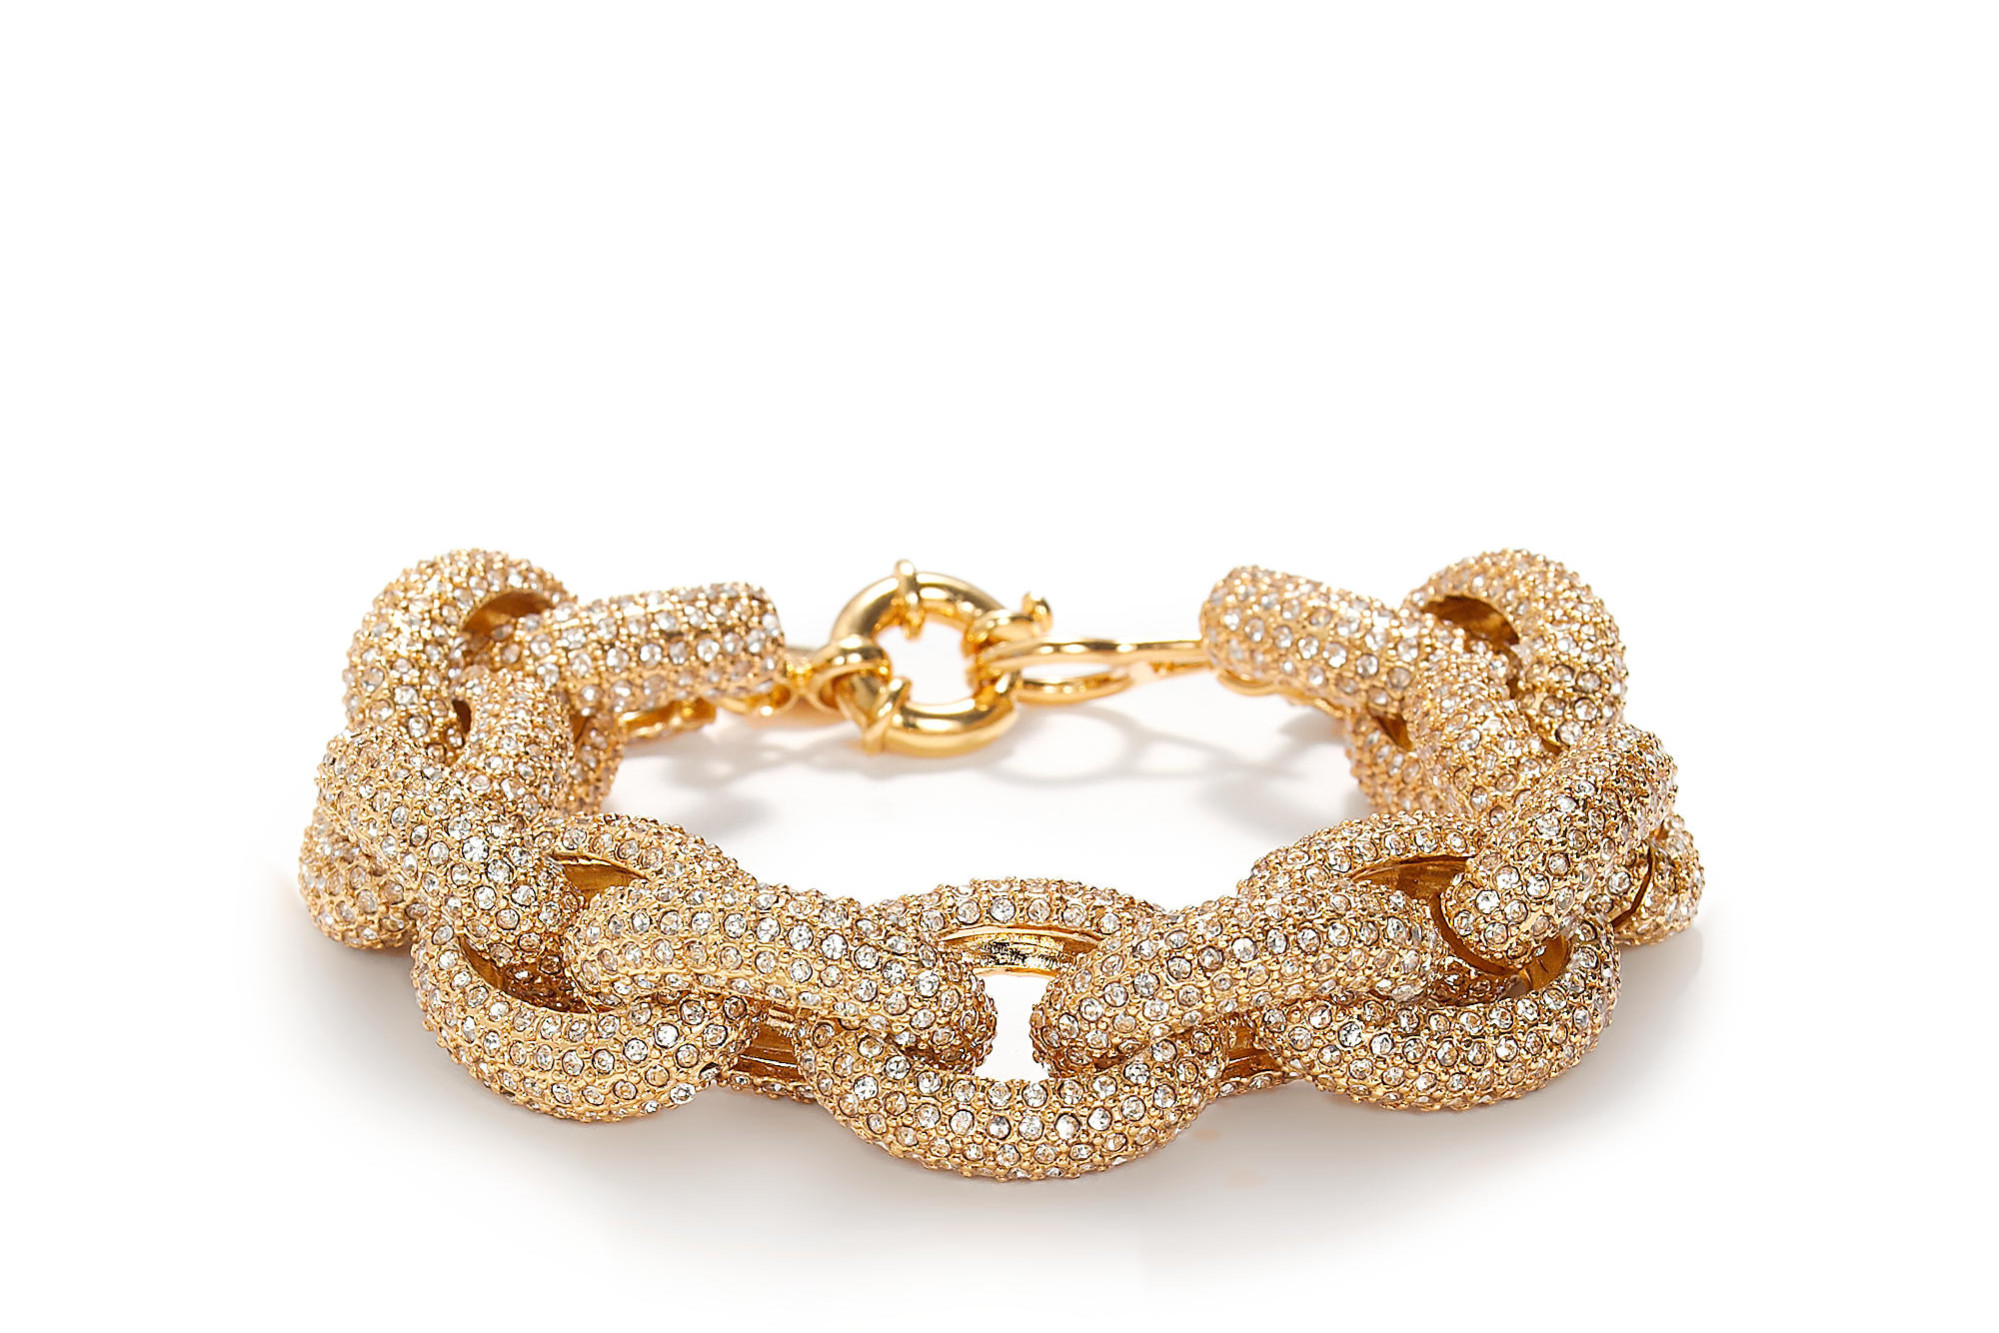 Classic Pavé Link Bracelet in gold with white stones from J Crew